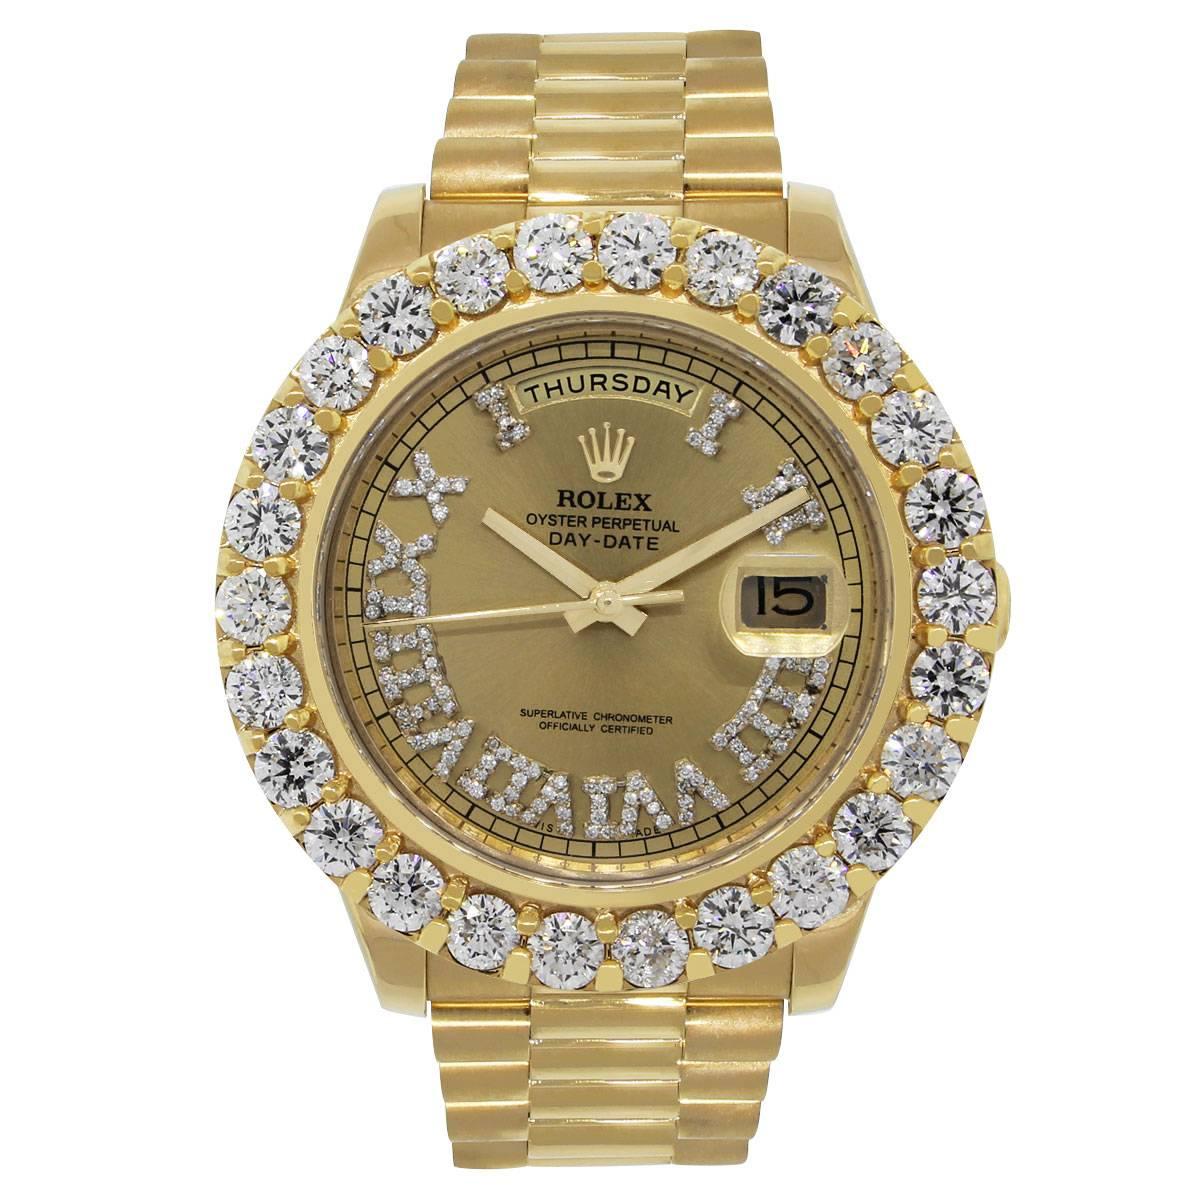 Brand: Rolex
MPN: 218238
Model: Day Date II
Case Material: 18k yellow gold
Case Diameter: 44mm
Crystal: Scratch resistant sapphire
Bezel: 18k yellow gold fixed diamond bezel with approximately 7ctw round brilliant diamonds. (aftermarket)
Dial: